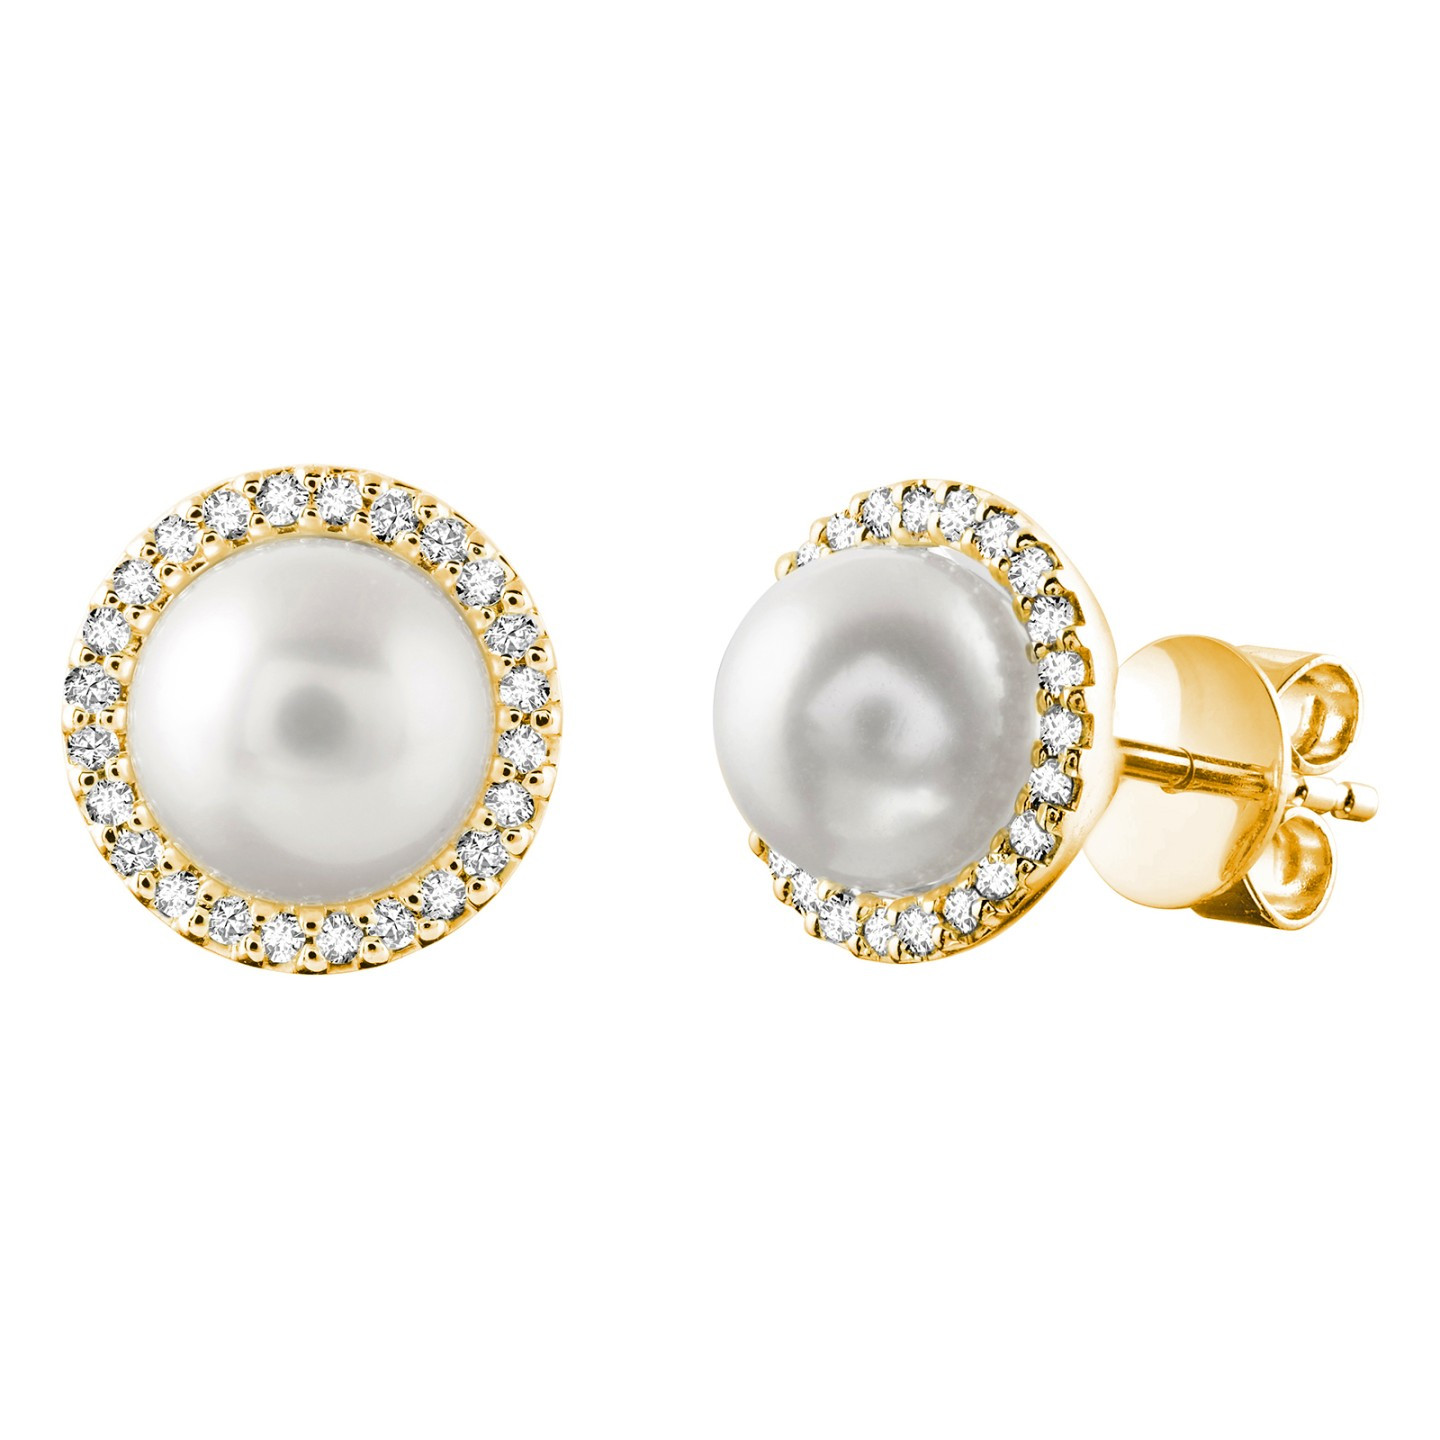 Round white Pearl Stud Earrings in 14K Yellow Gold (MV3304)